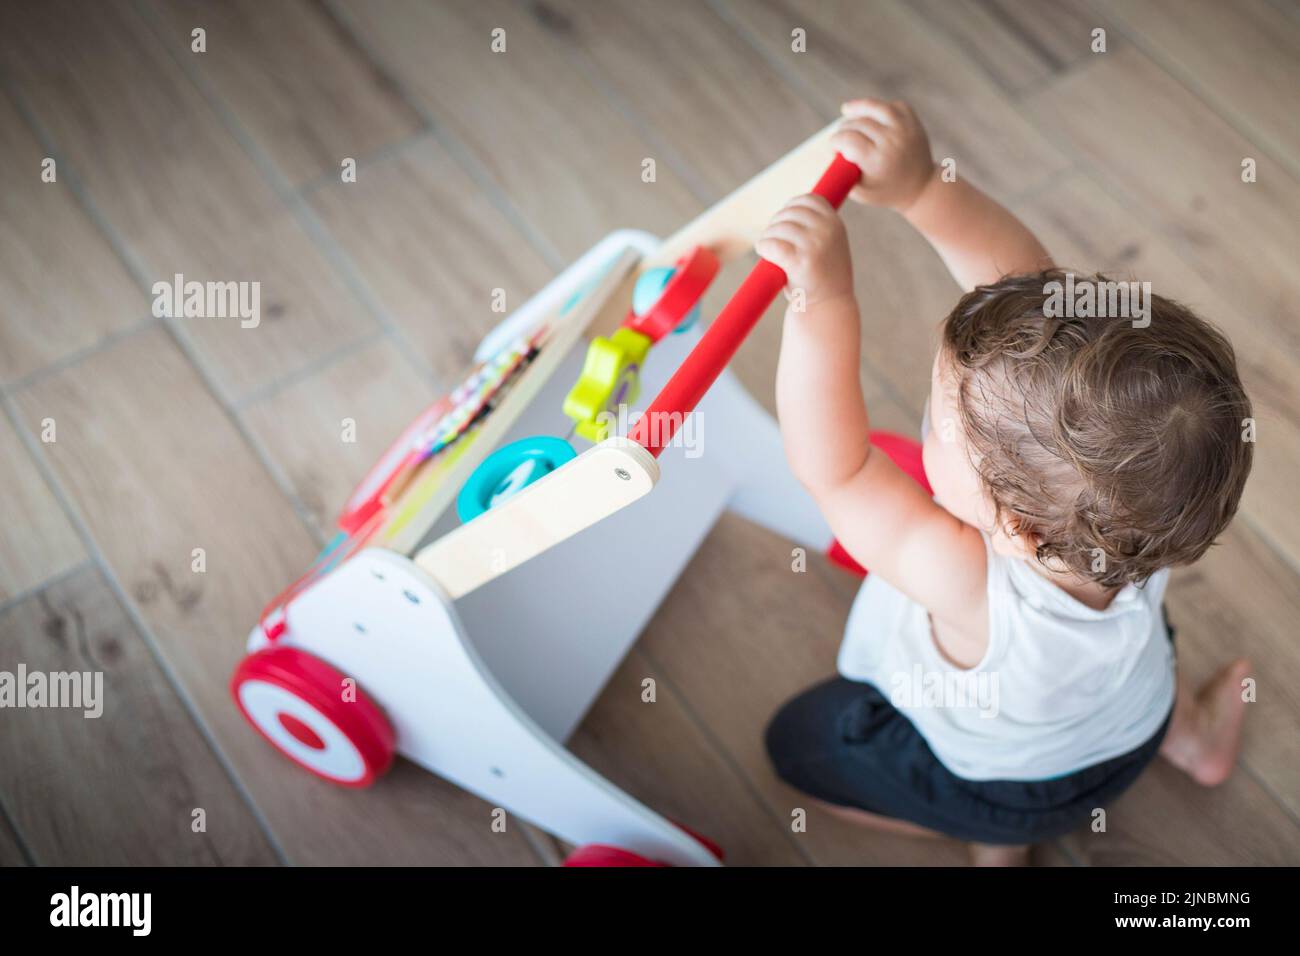 Baby boy, caucasian, one year old, playing and learning with walking toy. Top view, indoor. Stock Photo